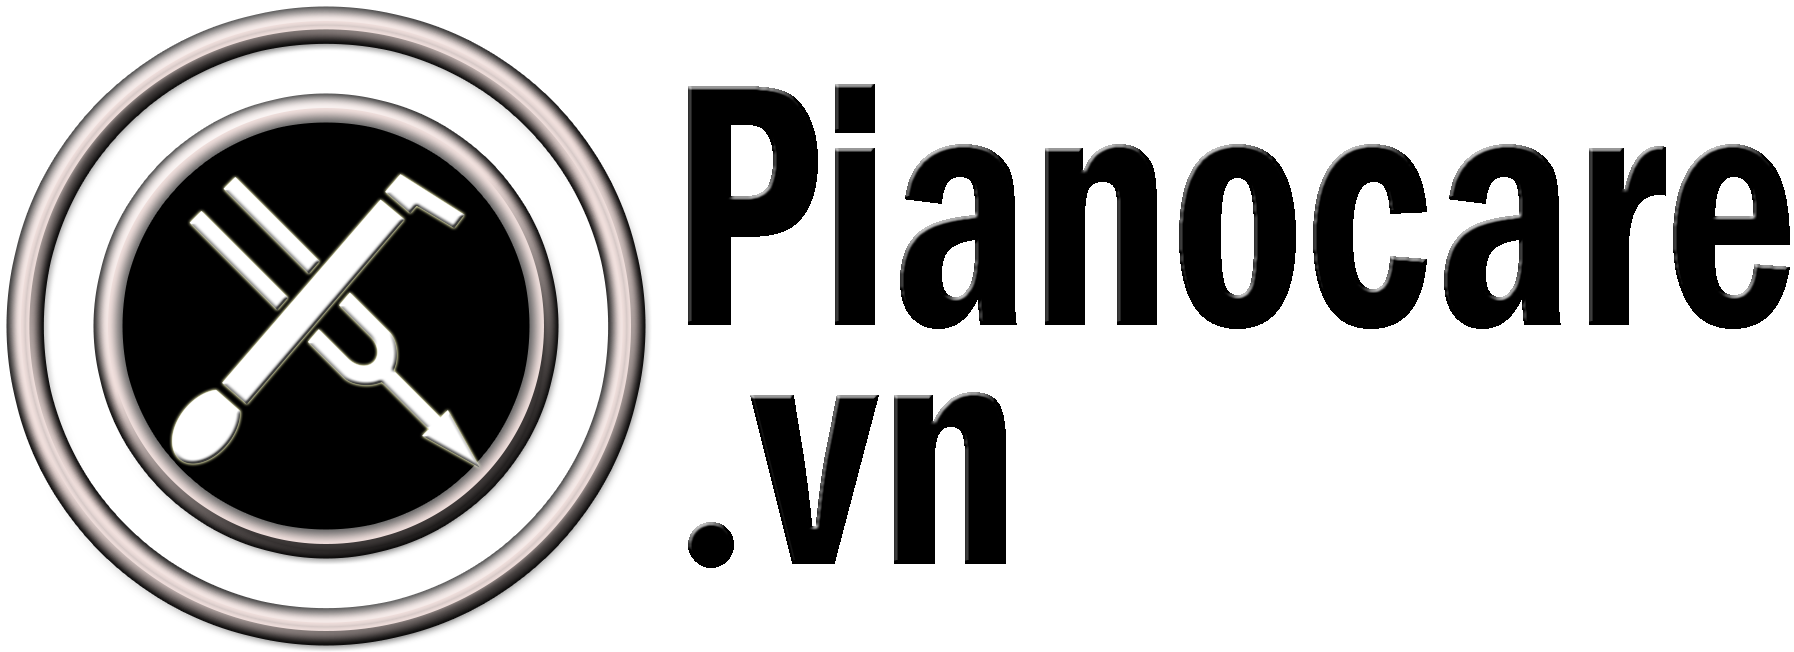 Pianocare.vn